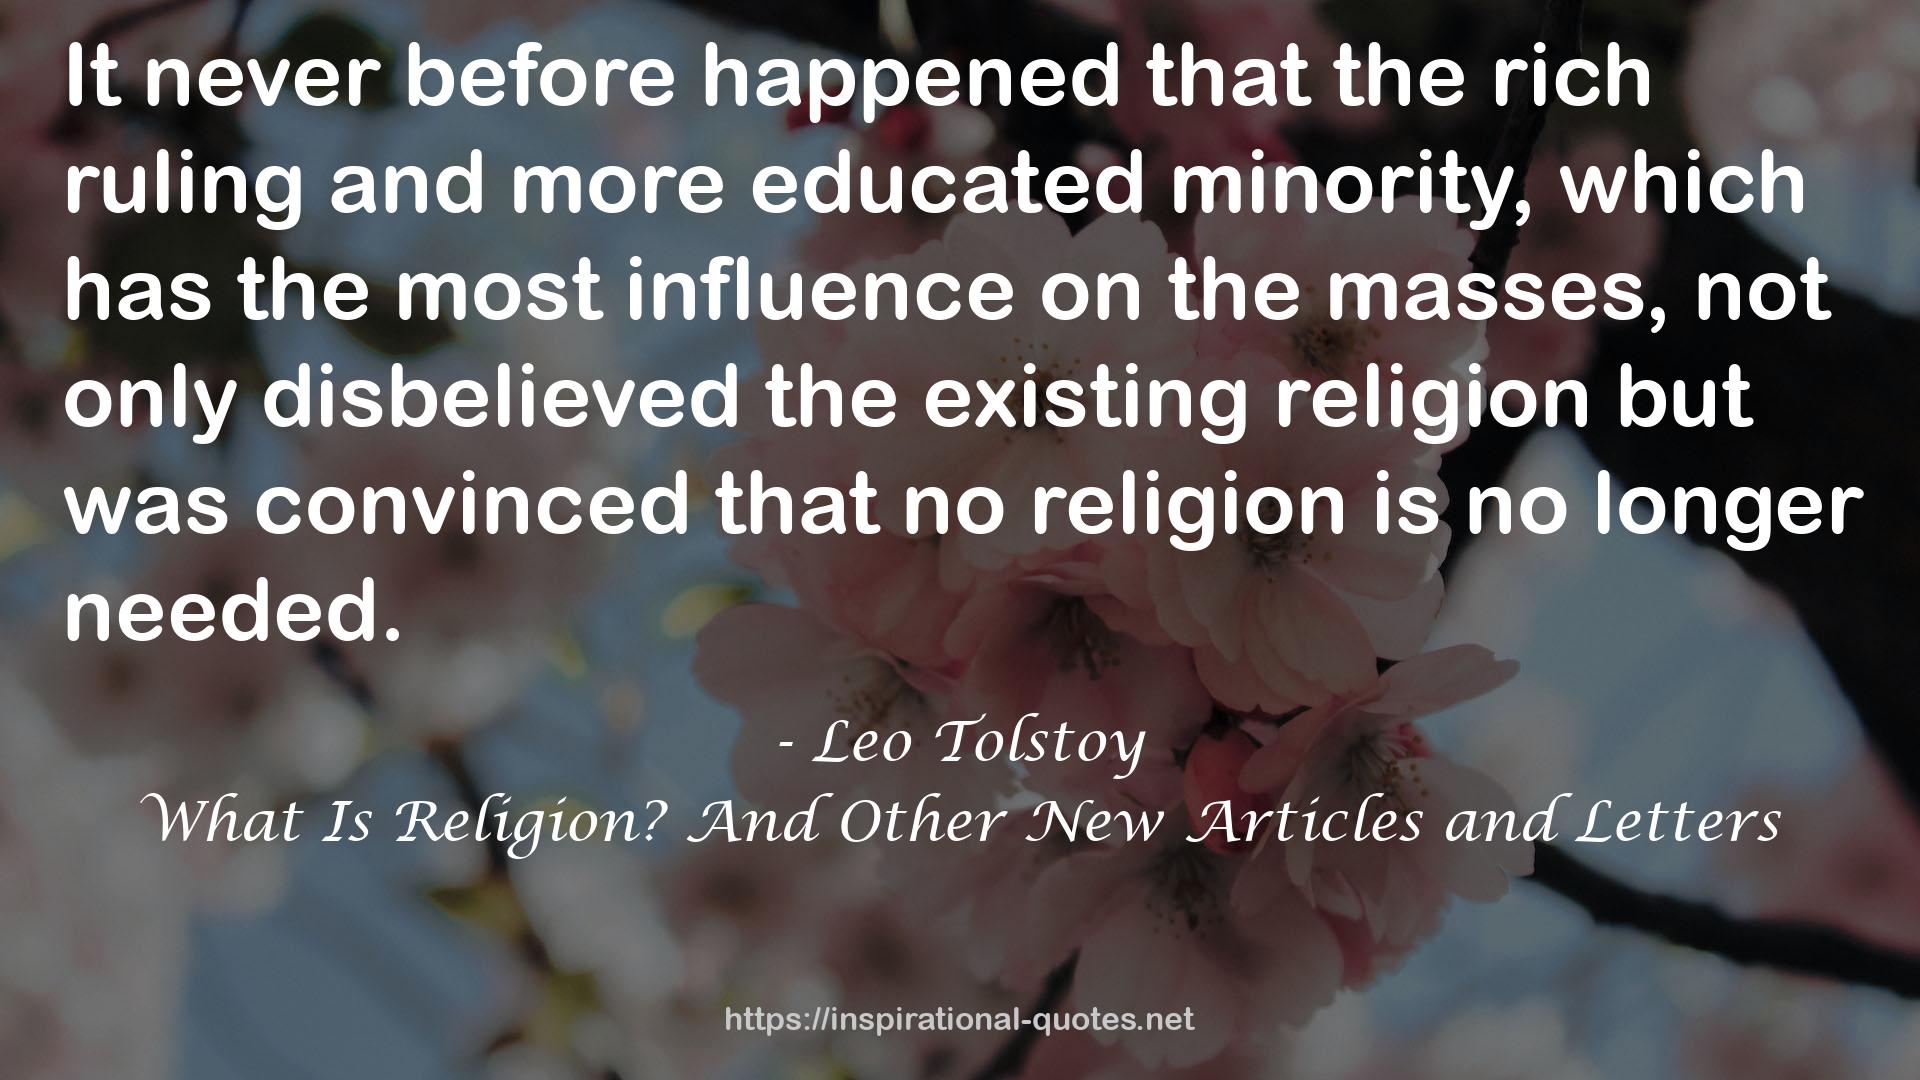 What Is Religion? And Other New Articles and Letters QUOTES